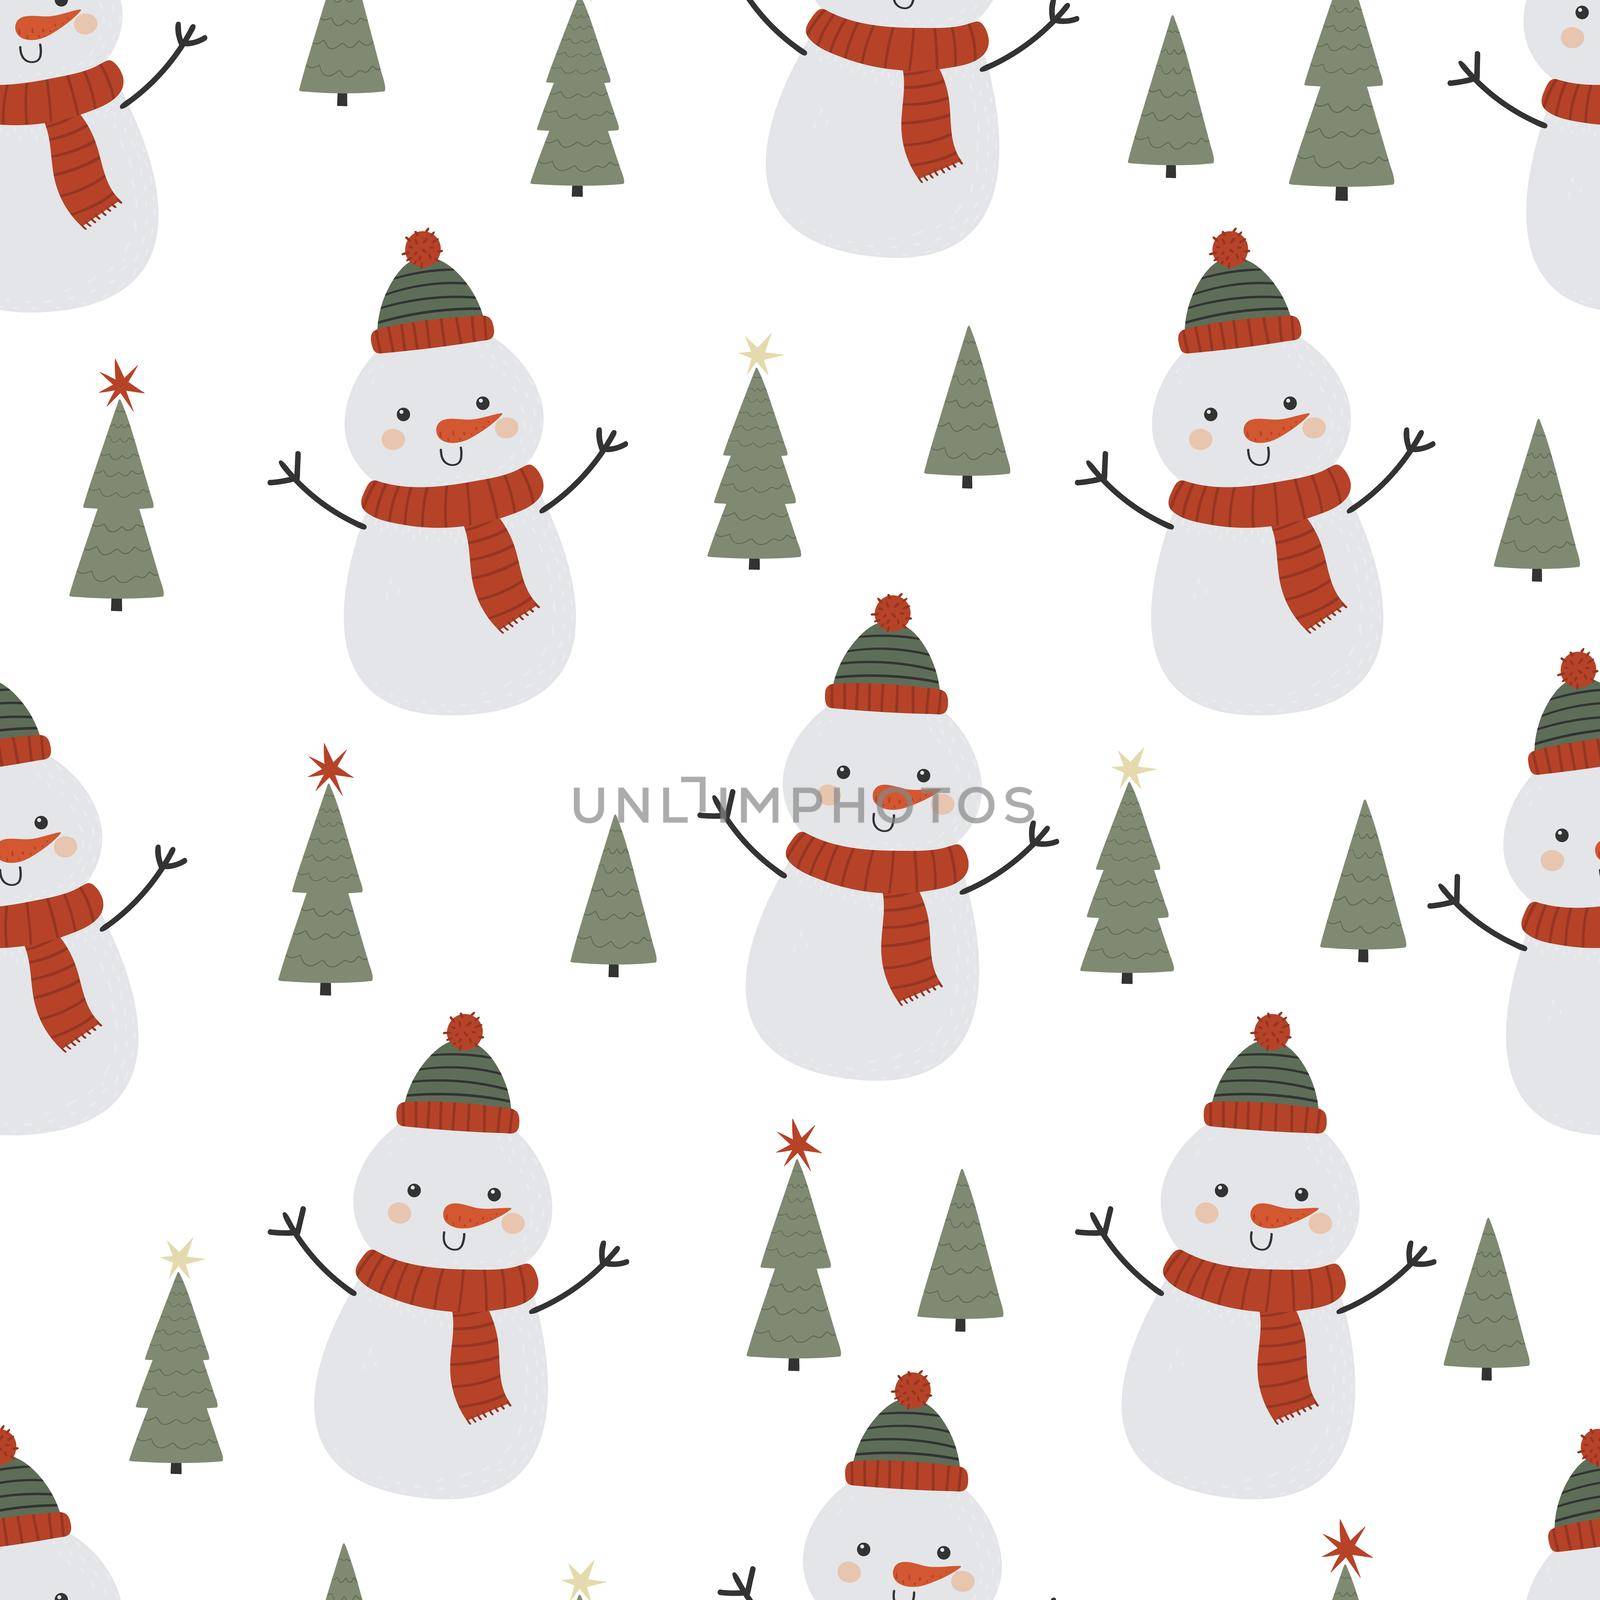 Seamless vector pattern with funny snowmen and Christmas trees. Winter seamless background in flat cartoon style. Design for fabric, wrapping paper, postcards.